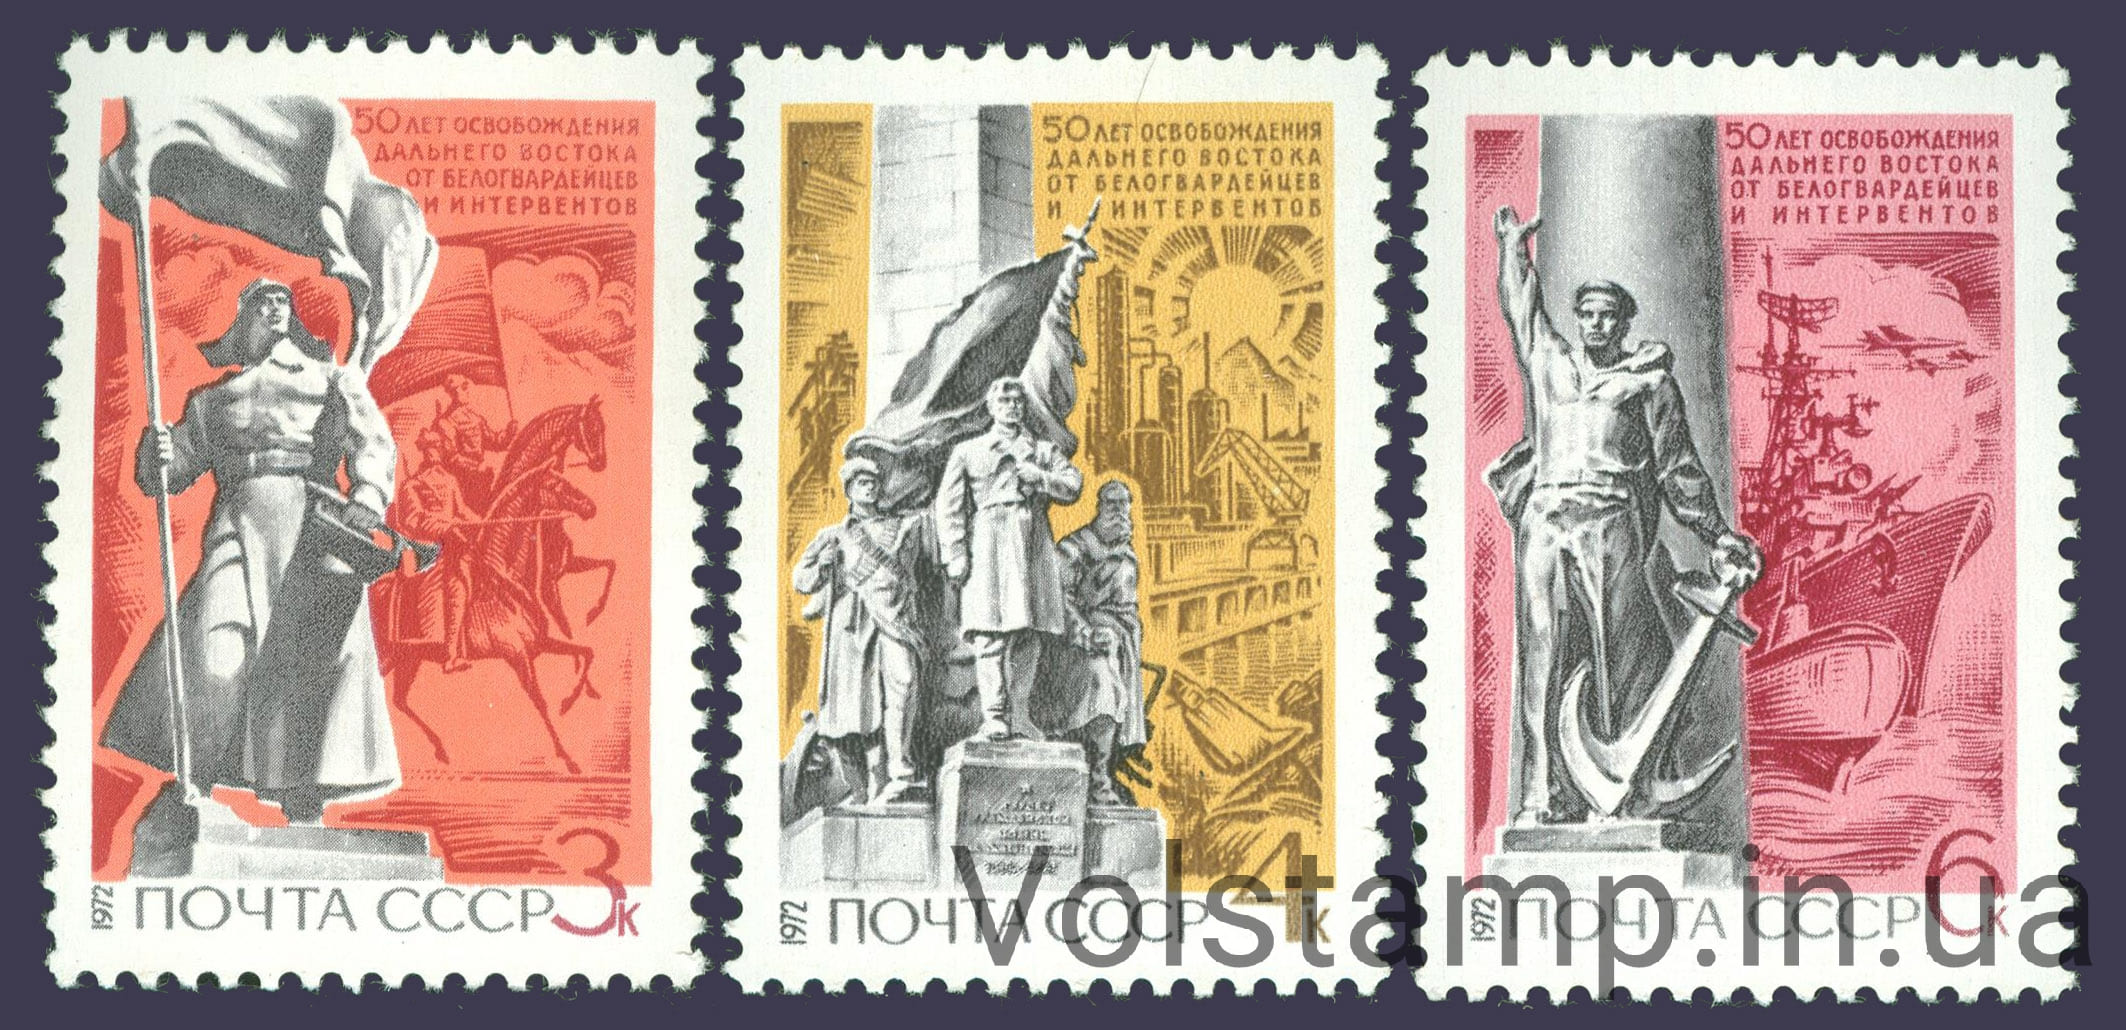 1972 series of stamps of 50 years of liberation of the Soviet Far East from the intervention №4082-4084